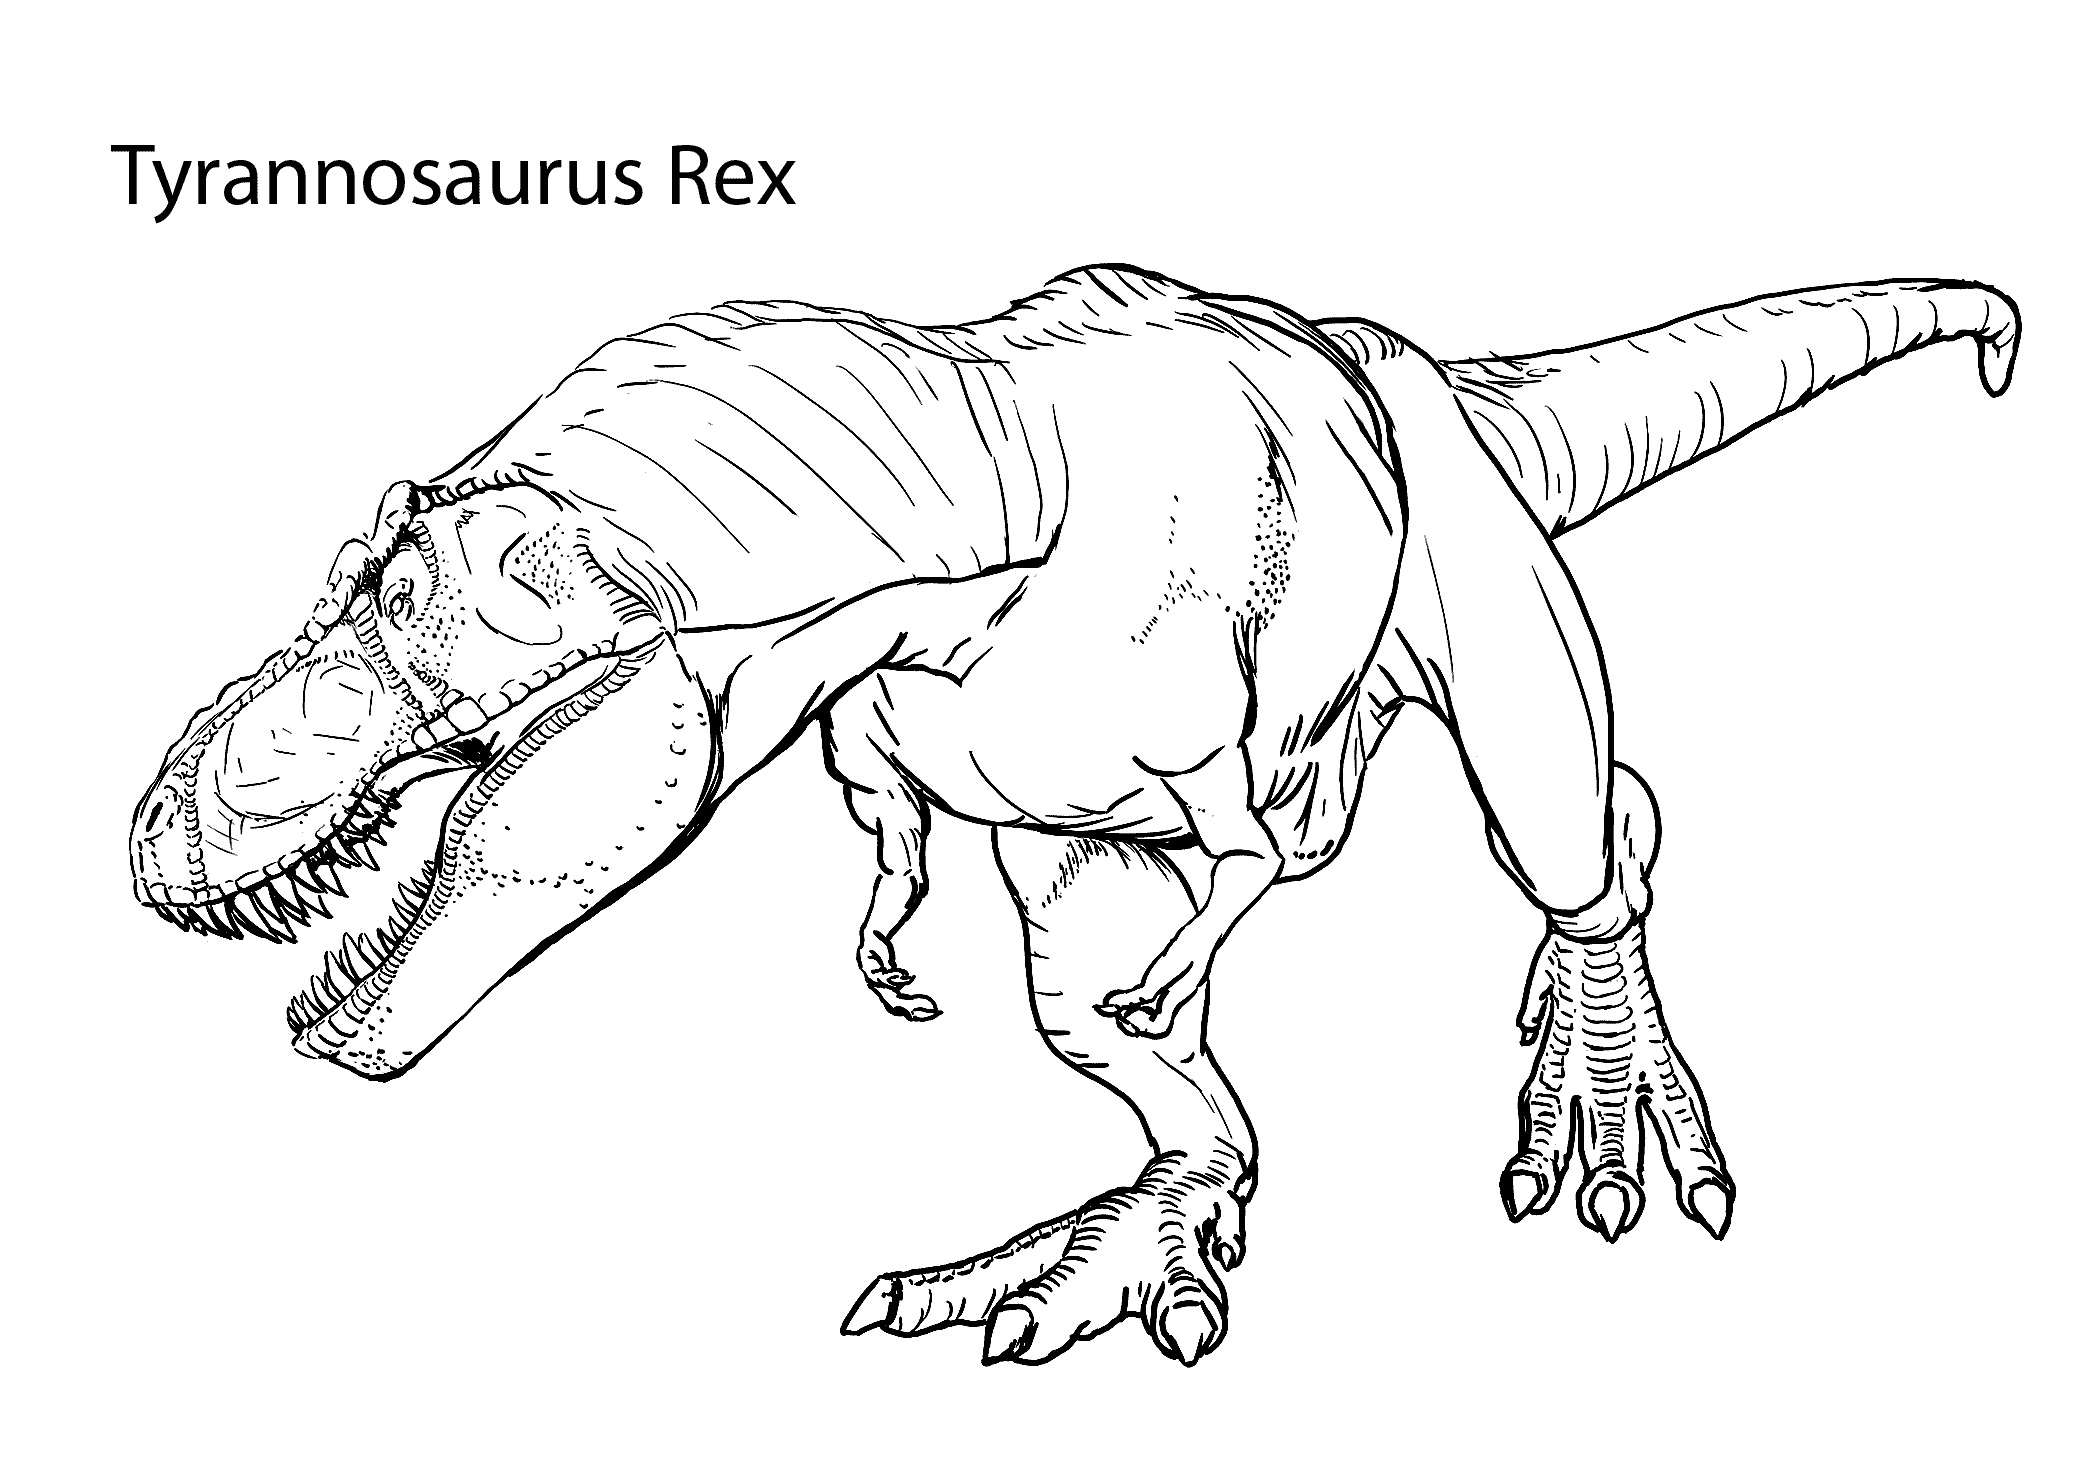 Tyrannosaurus Rex Coloring Pages - Dinosaurs Coloring ...